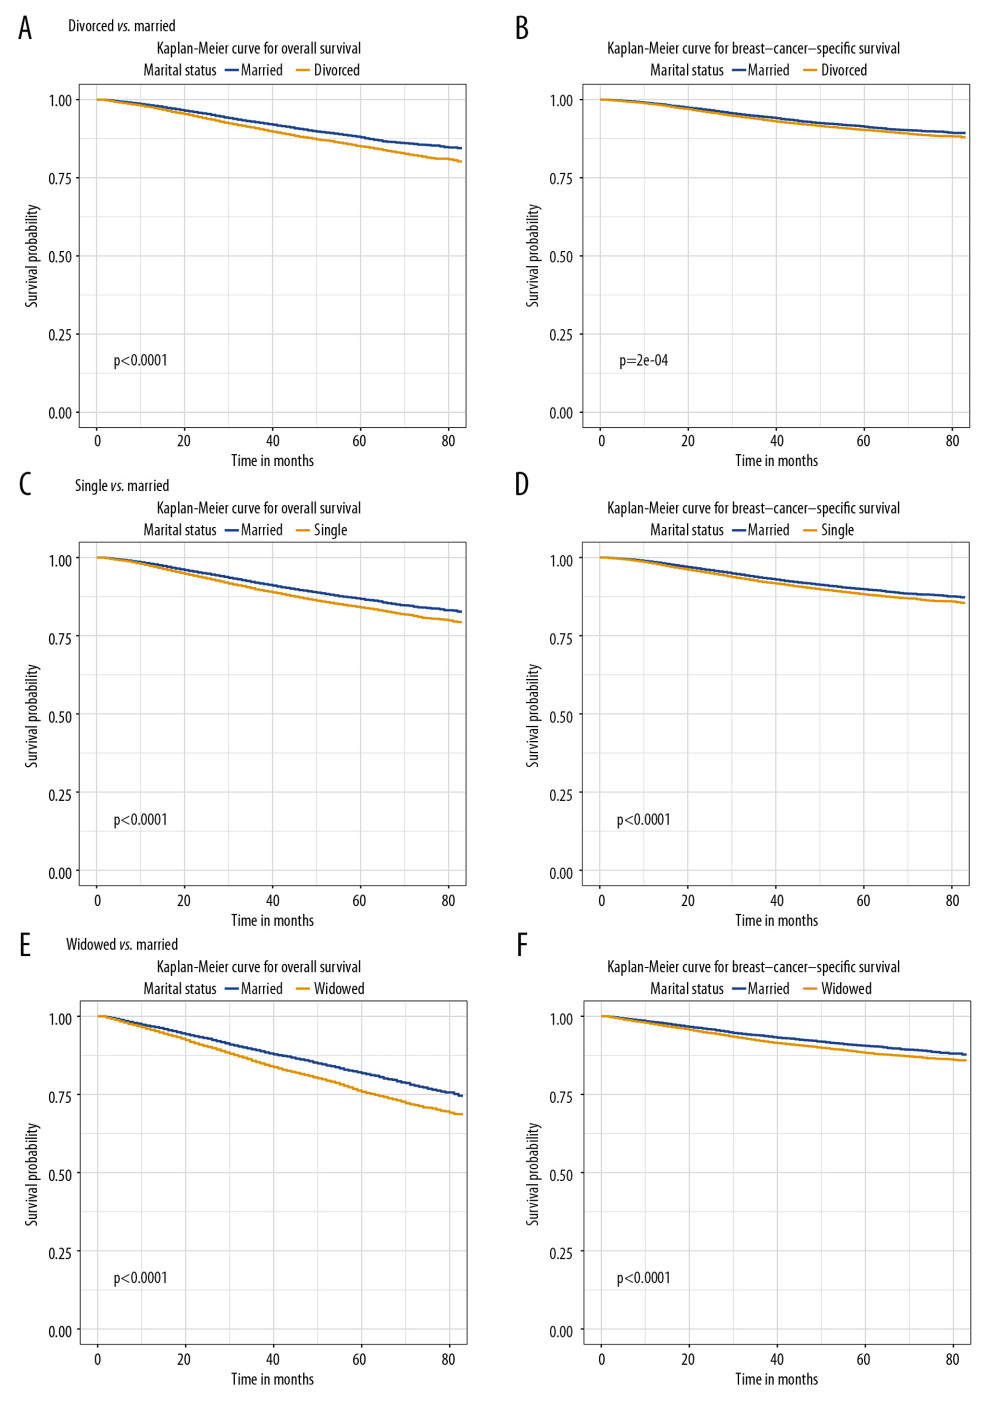 The overall survival (A, C, E) and breast cancer-caused special survival (B, D, F) of patients with breast cancer according to marital status after PSM.